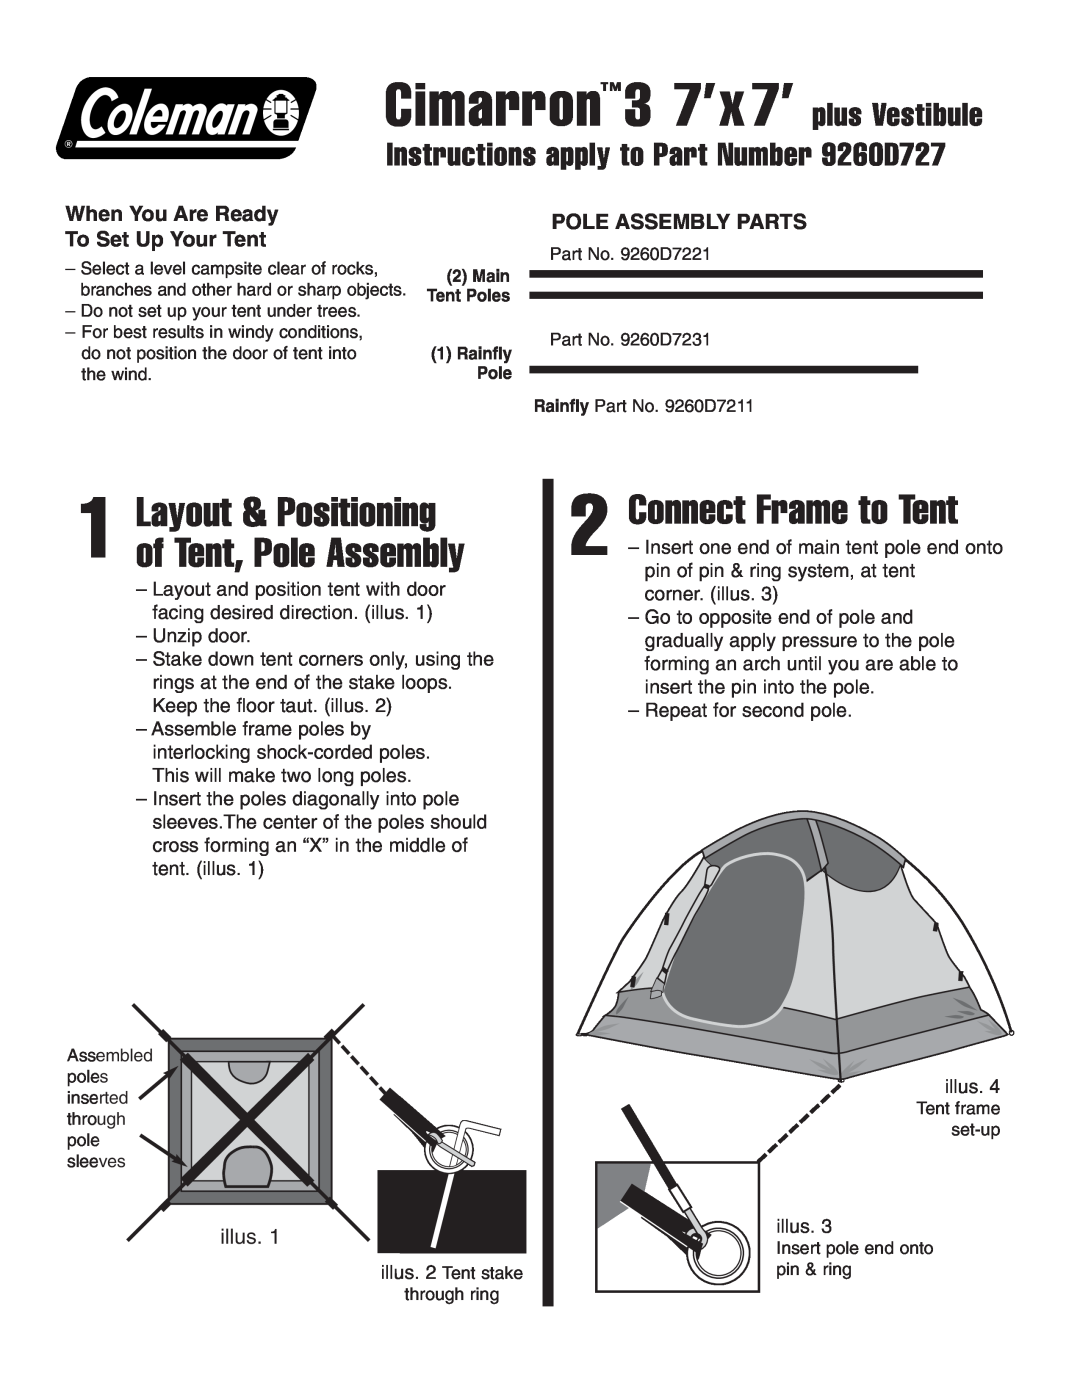 Coleman manual Connect Frame to Tent, Instructions apply to Part Number 9260D727, Pole Assembly Parts, illus 